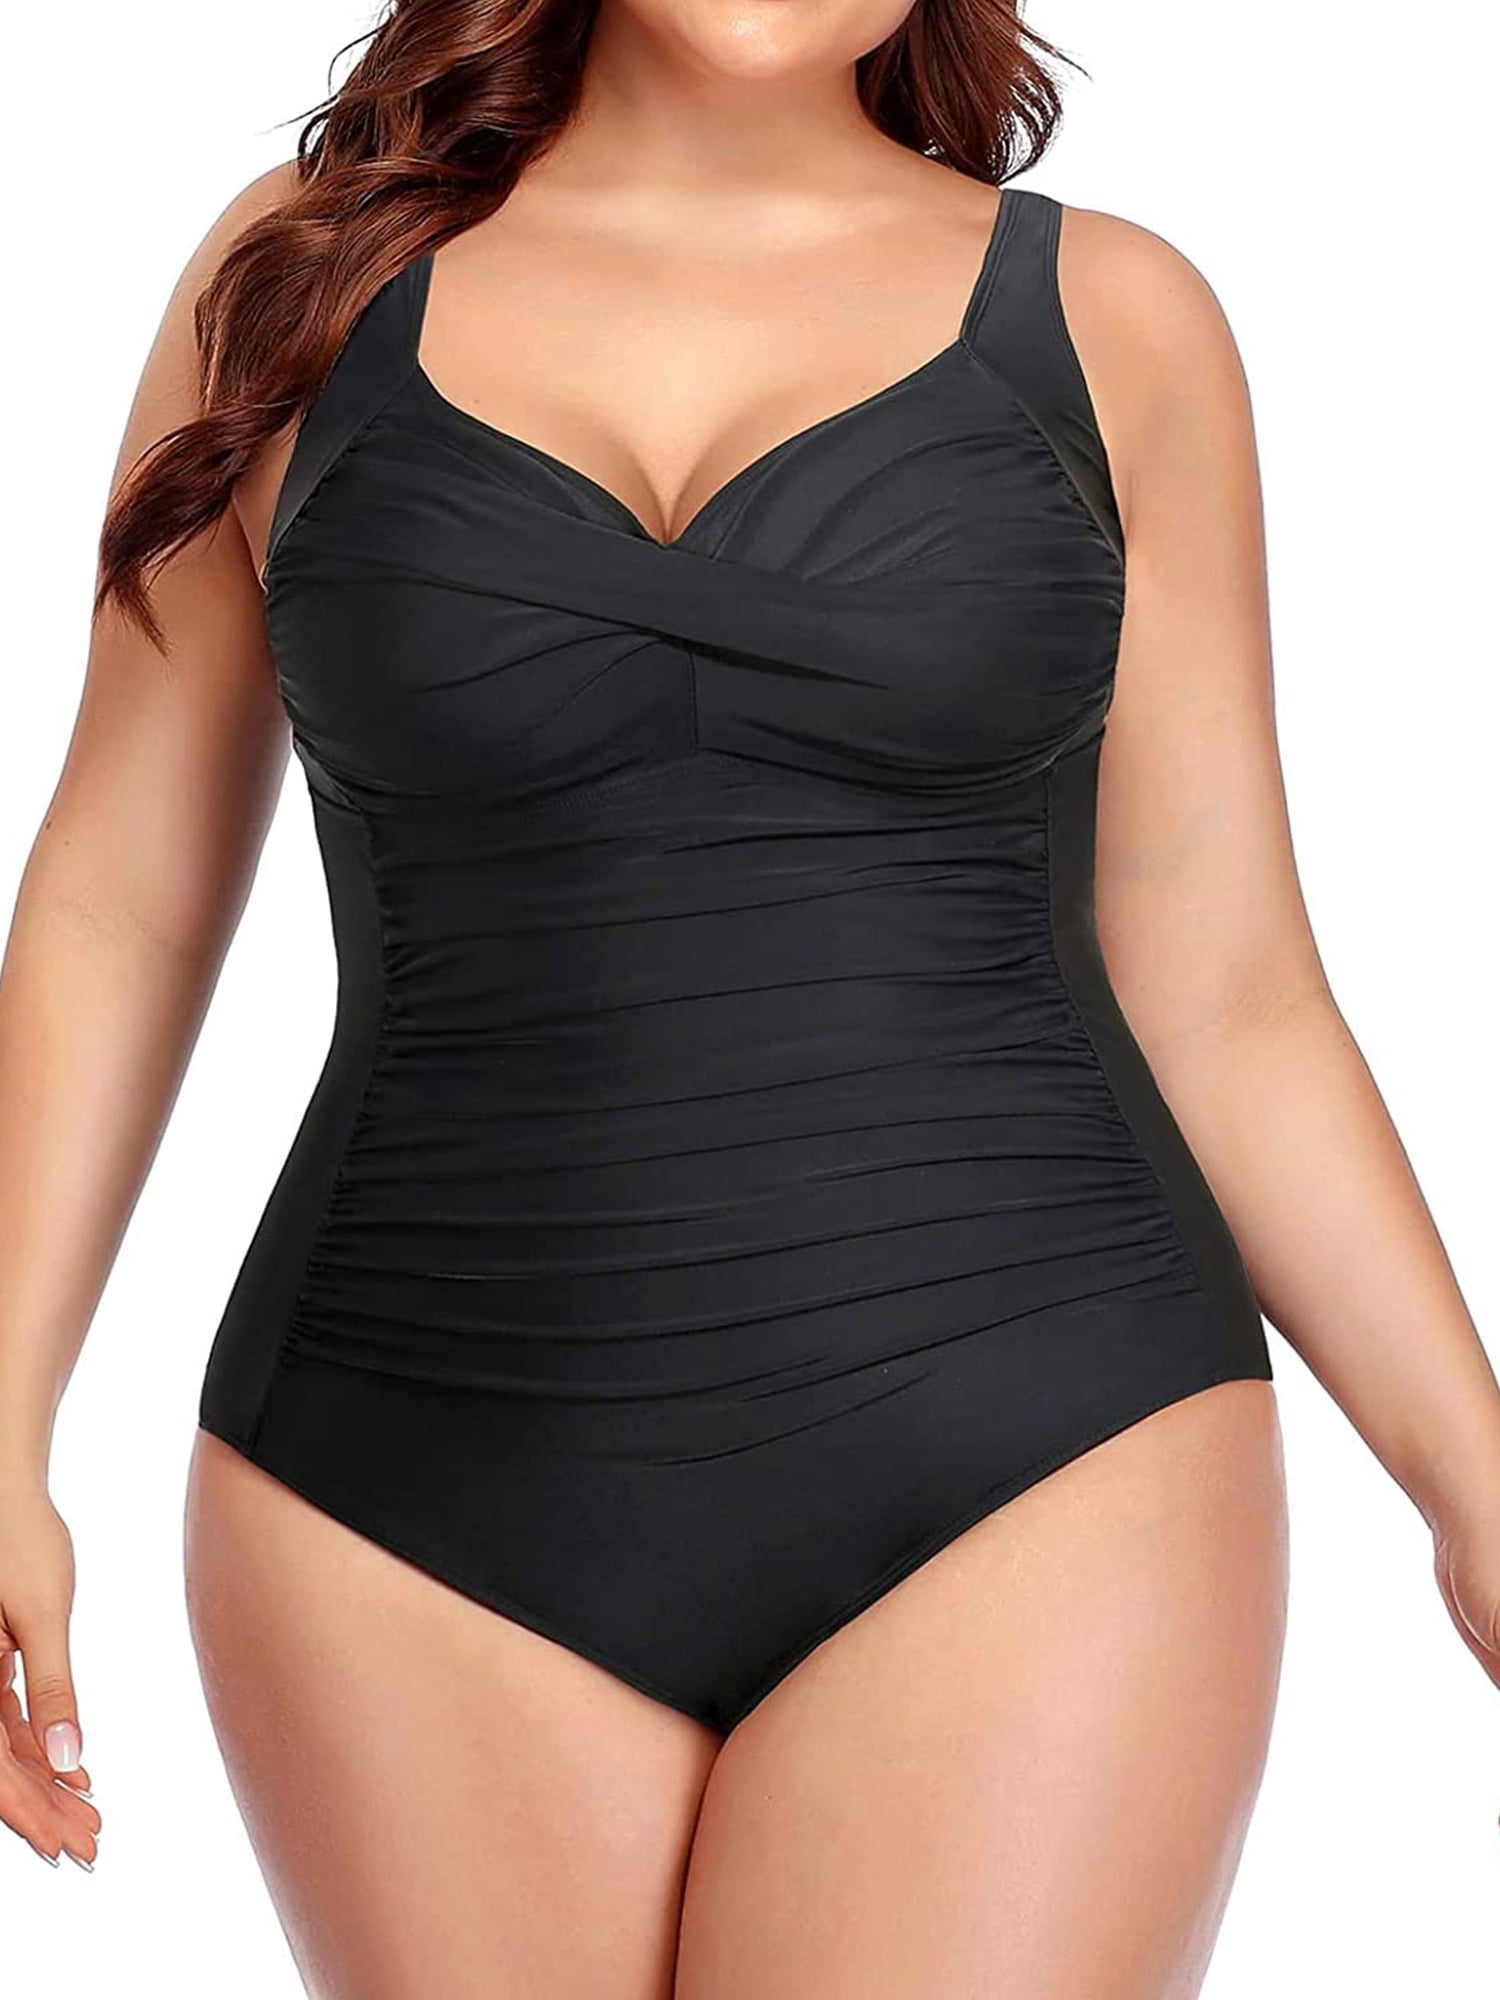 Chama Plus Size One Piece Swimsuit for Women Twist Front Tummy Control  Bathing Suits 